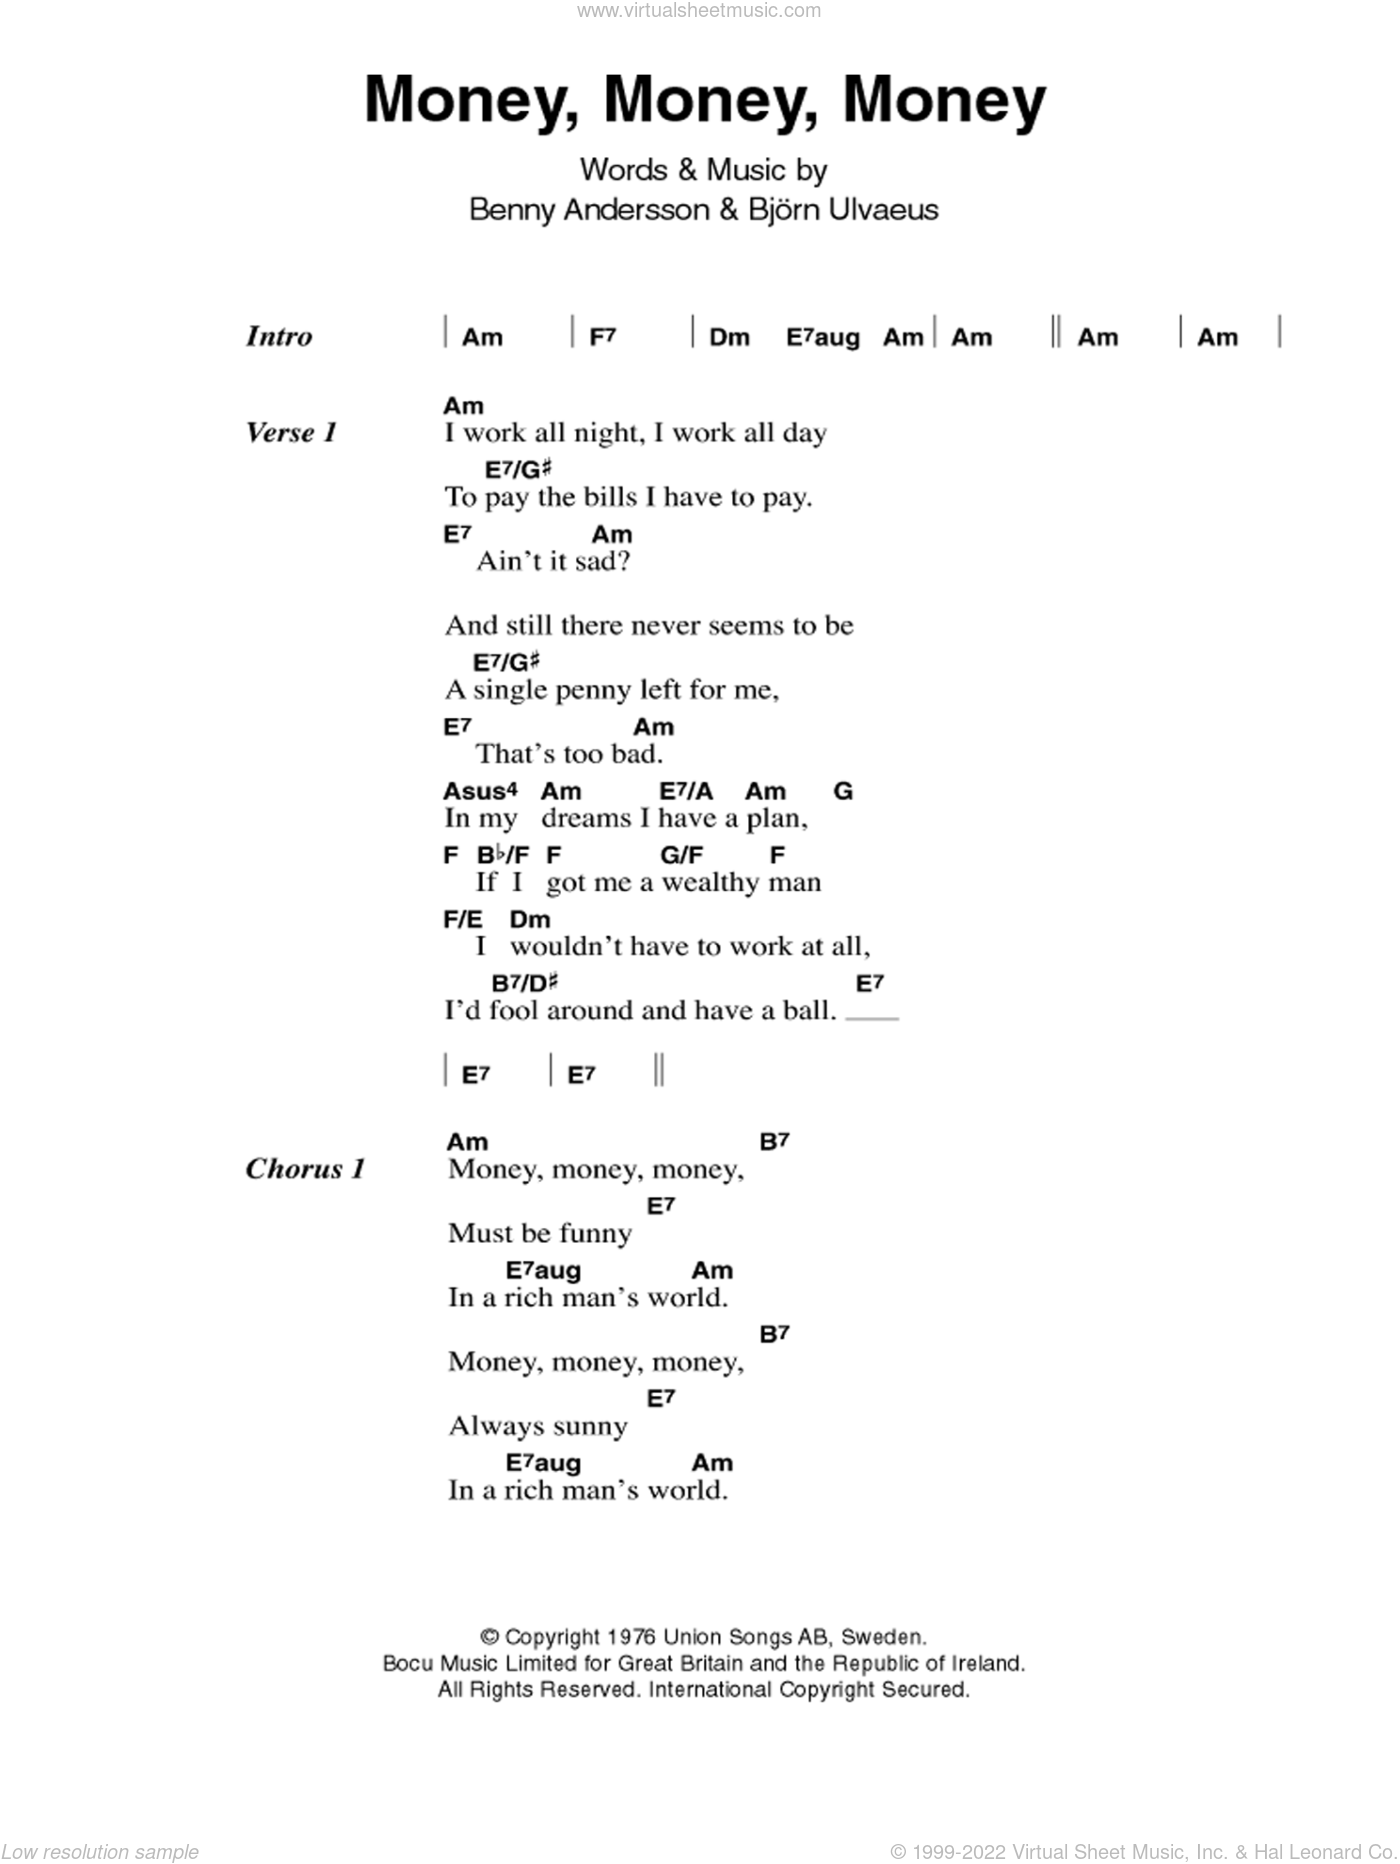 Abba Money Money Money Sheet Music For Guitar Chords Pdf Abba /faith hill the winner takes it all, with benny andersson on piano. abba money money money sheet music for guitar chords pdf